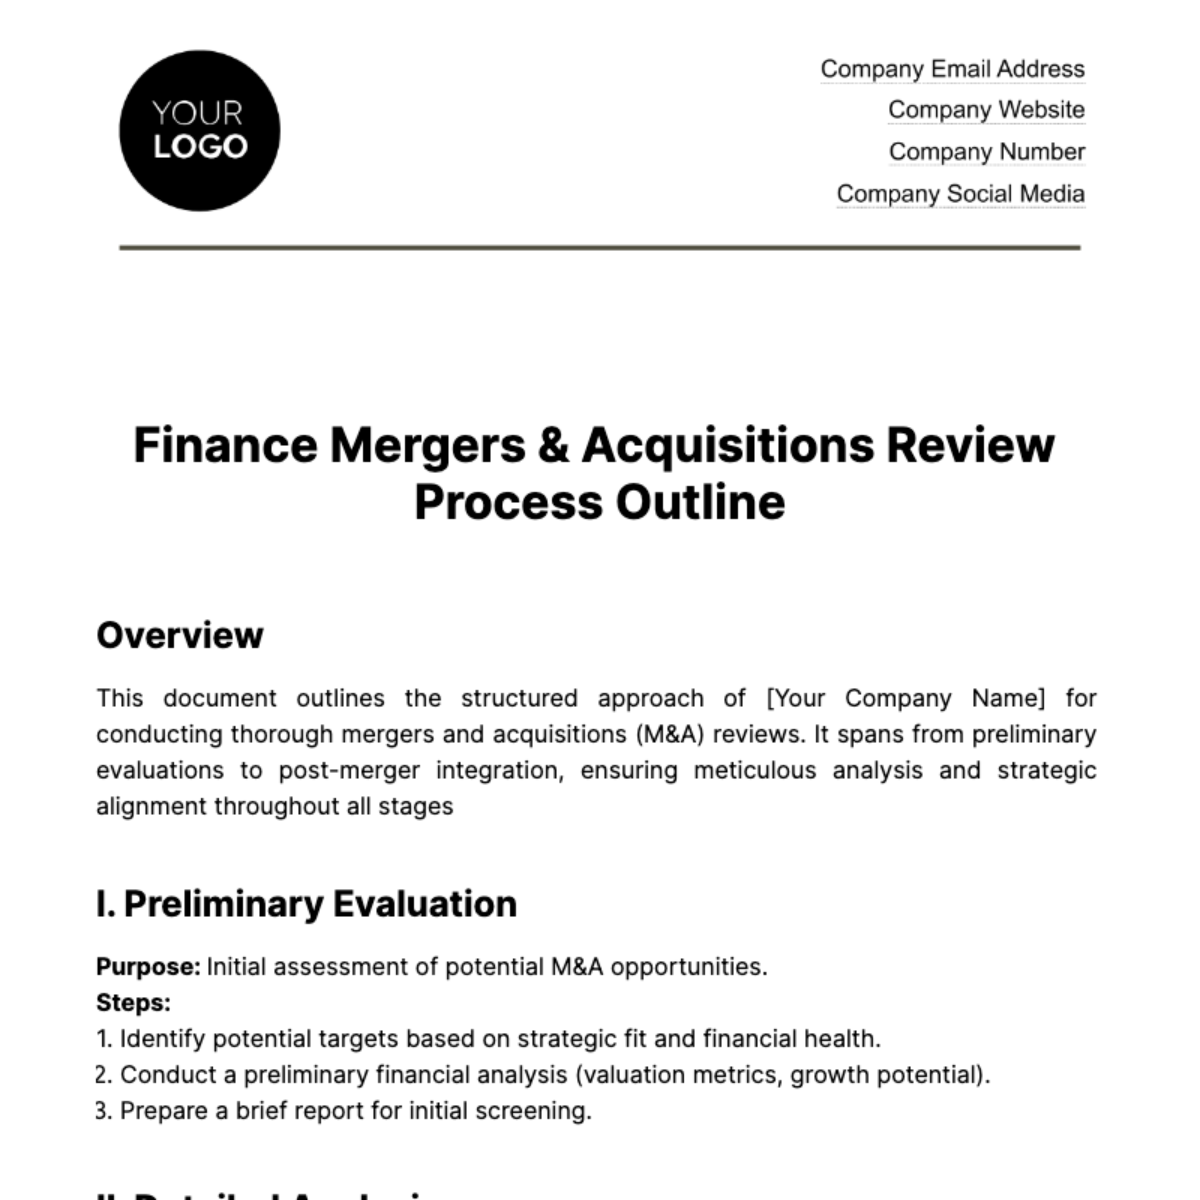 Free Finance Mergers & Acquisitions Review Process Outline Template